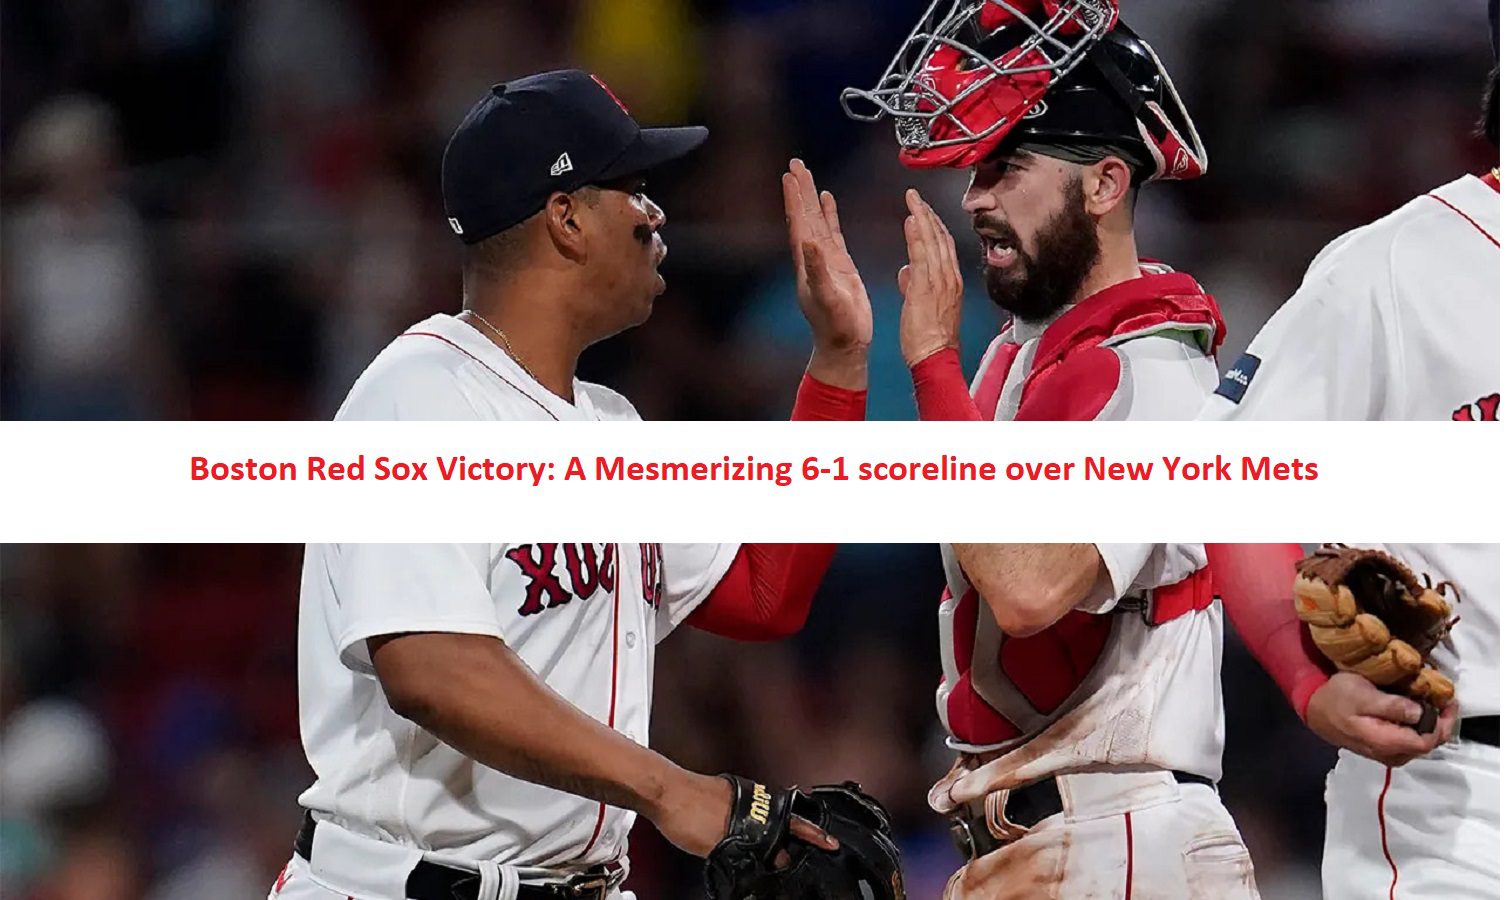 Boston Red Sox Victory: A Mesmerizing 6-1 scoreline over New York Mets